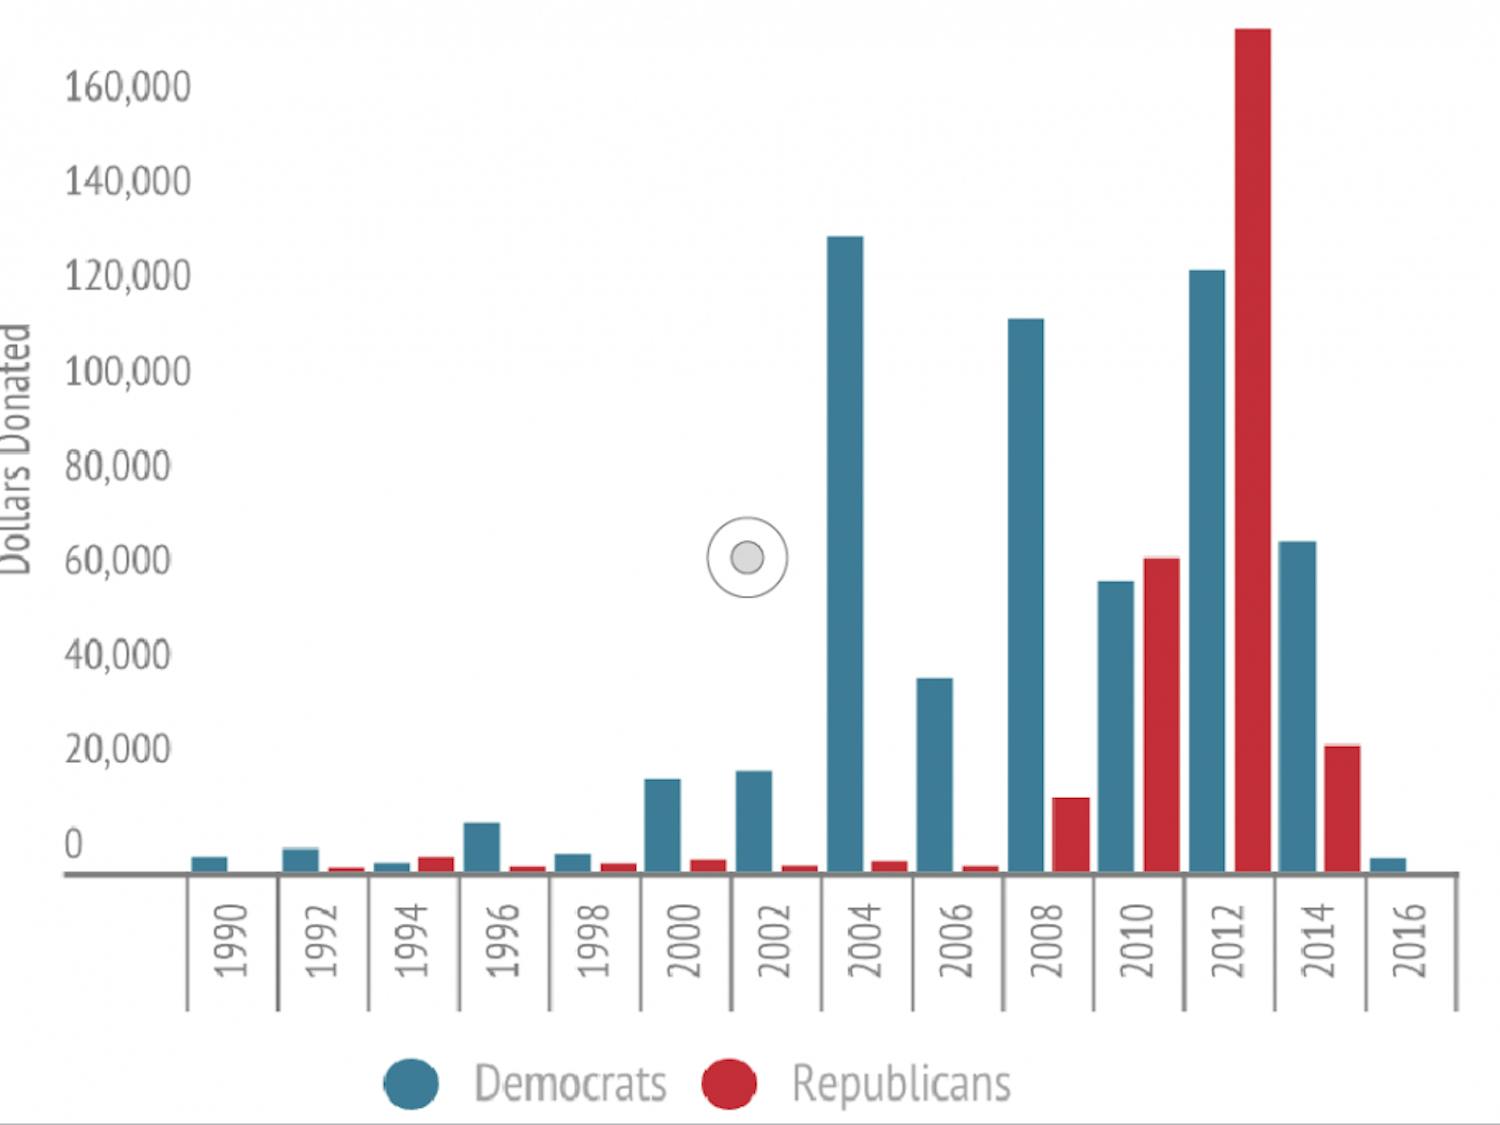 With the exception of the 2010 and 2012 election cycles, College professors have historically donated more to Democratic candidates than Republicans. 